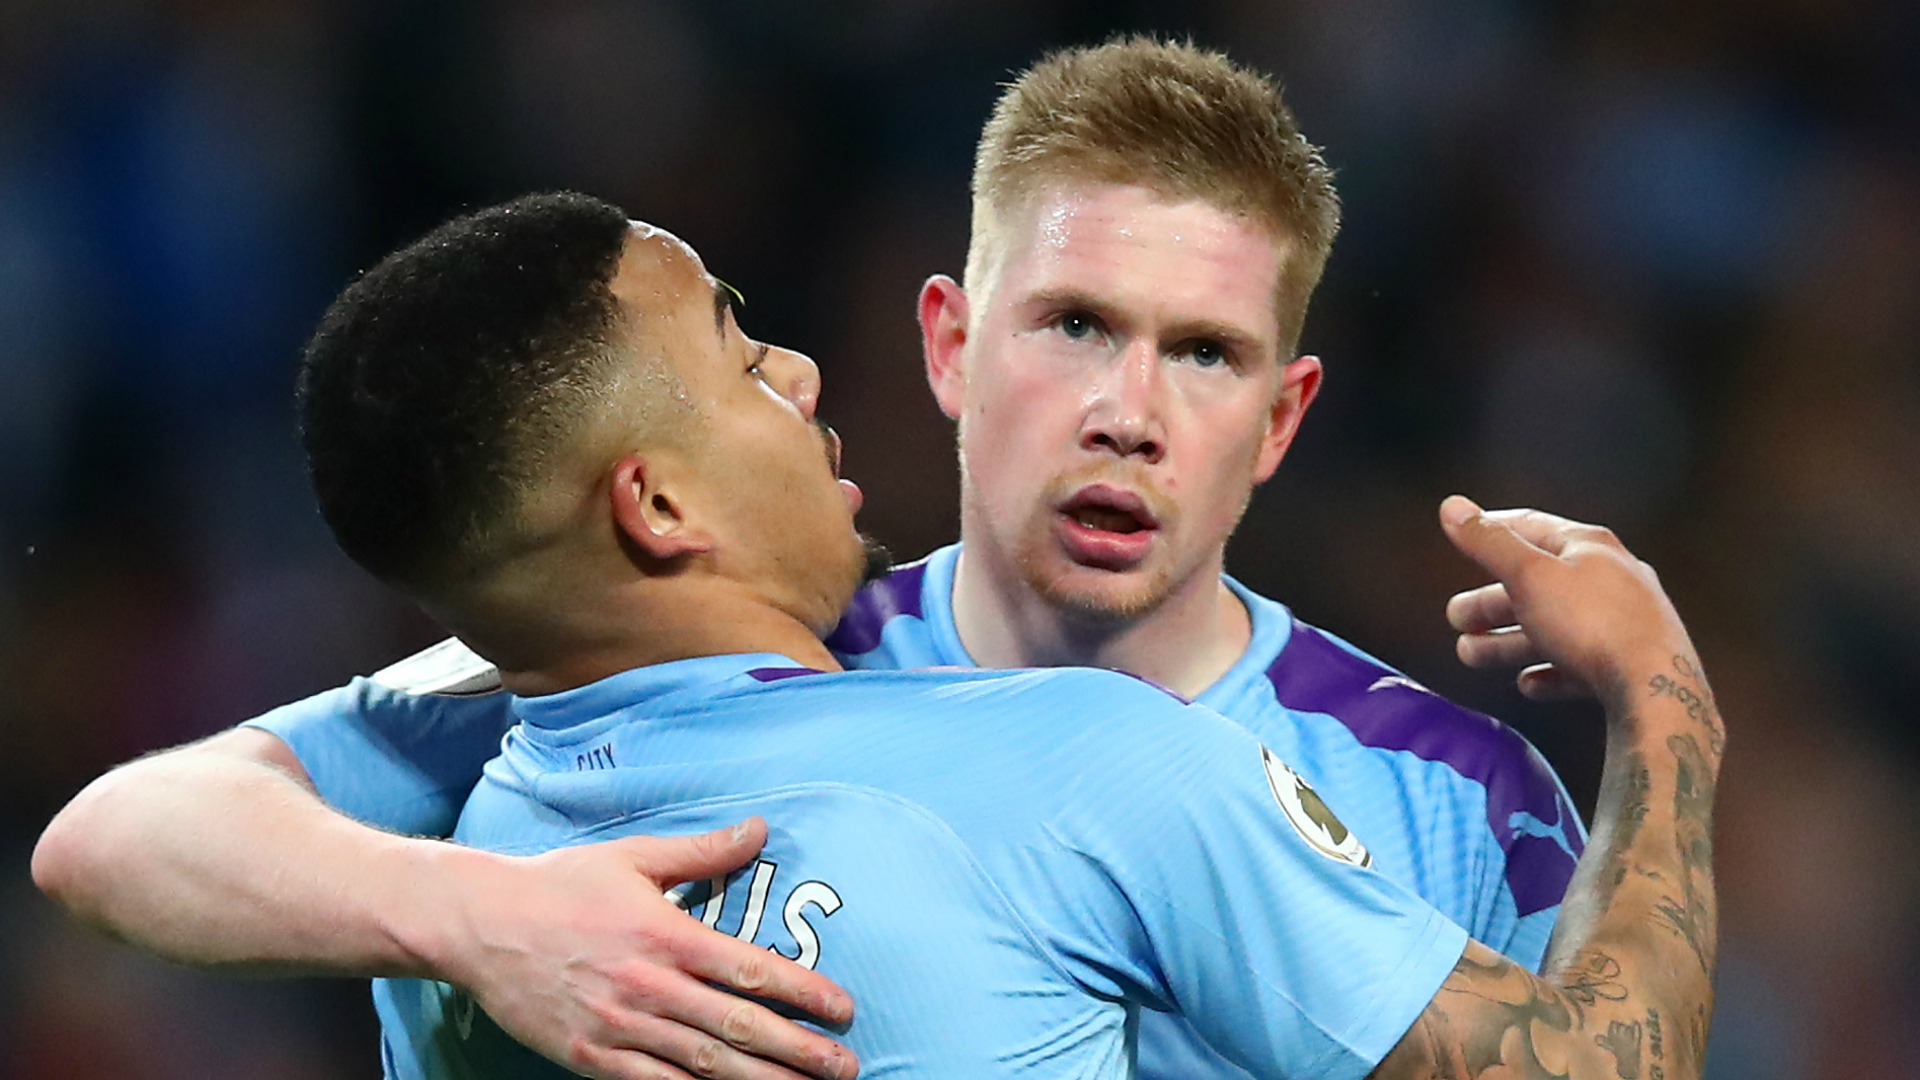 Much of Manchester City's hopes against Real Madrid rest on Kevin De Bruyne, who has enjoyed a magnificent season.